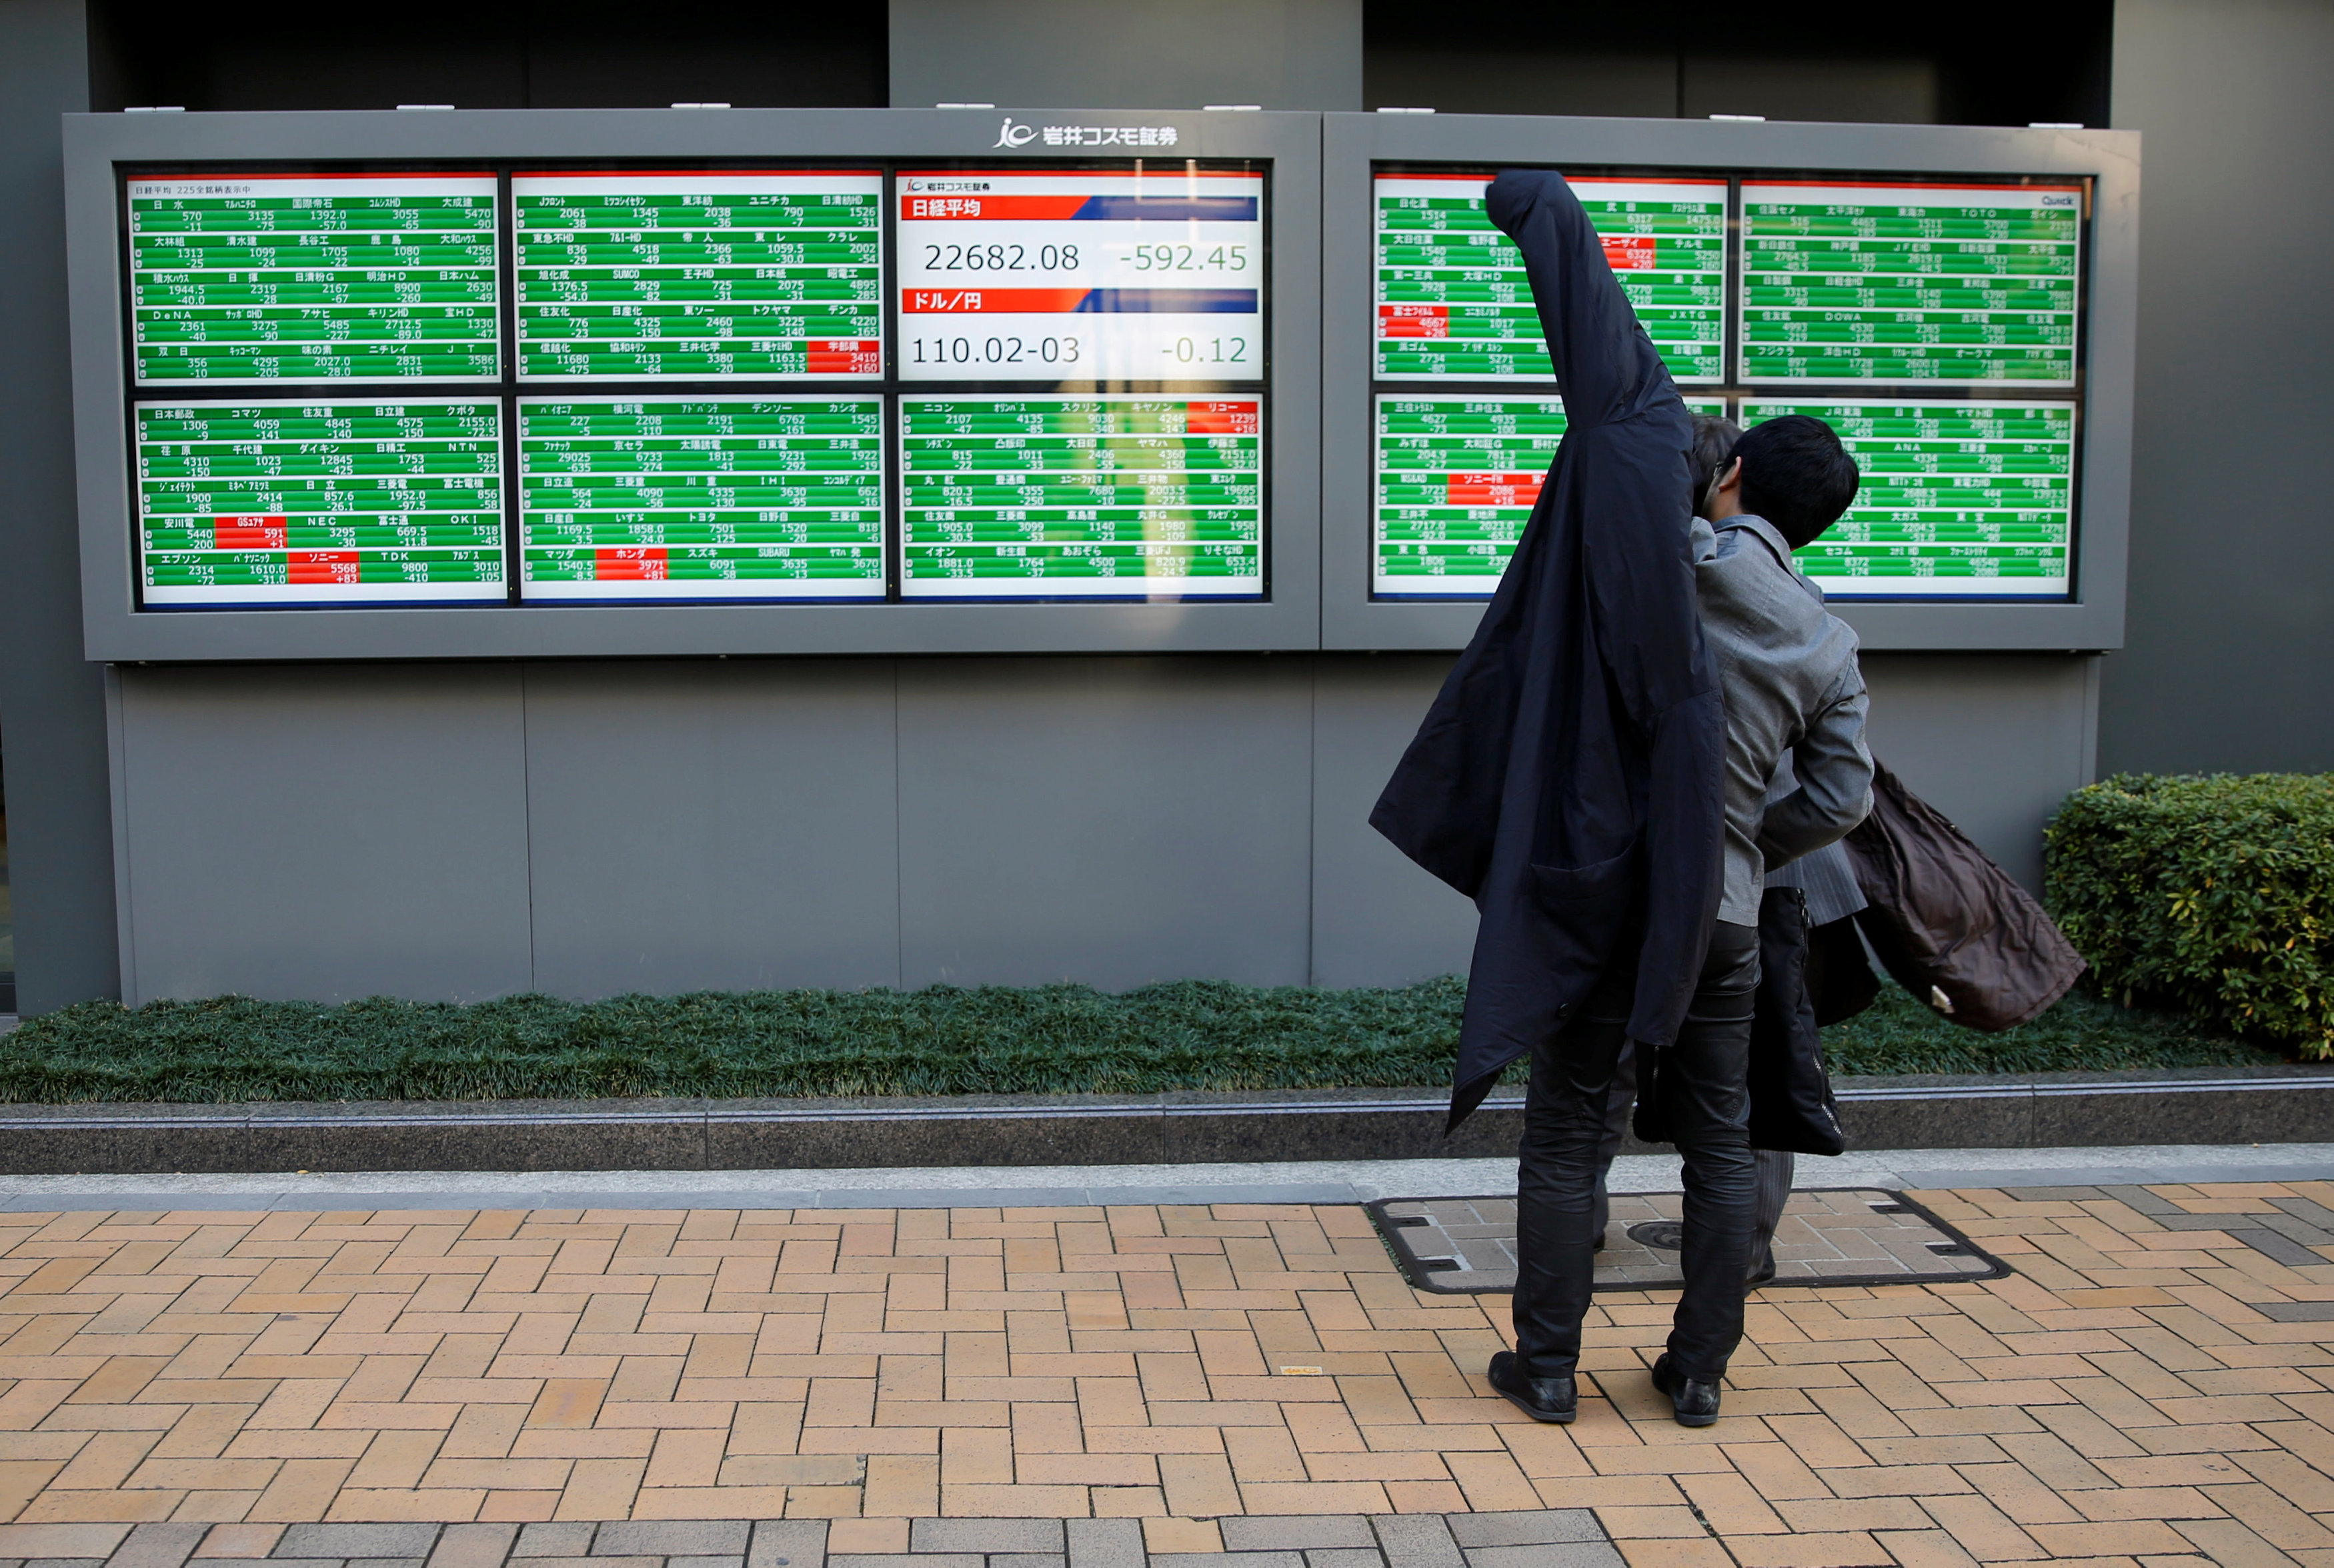 Asian shares resume fall, Saudi tensions lift oil prices